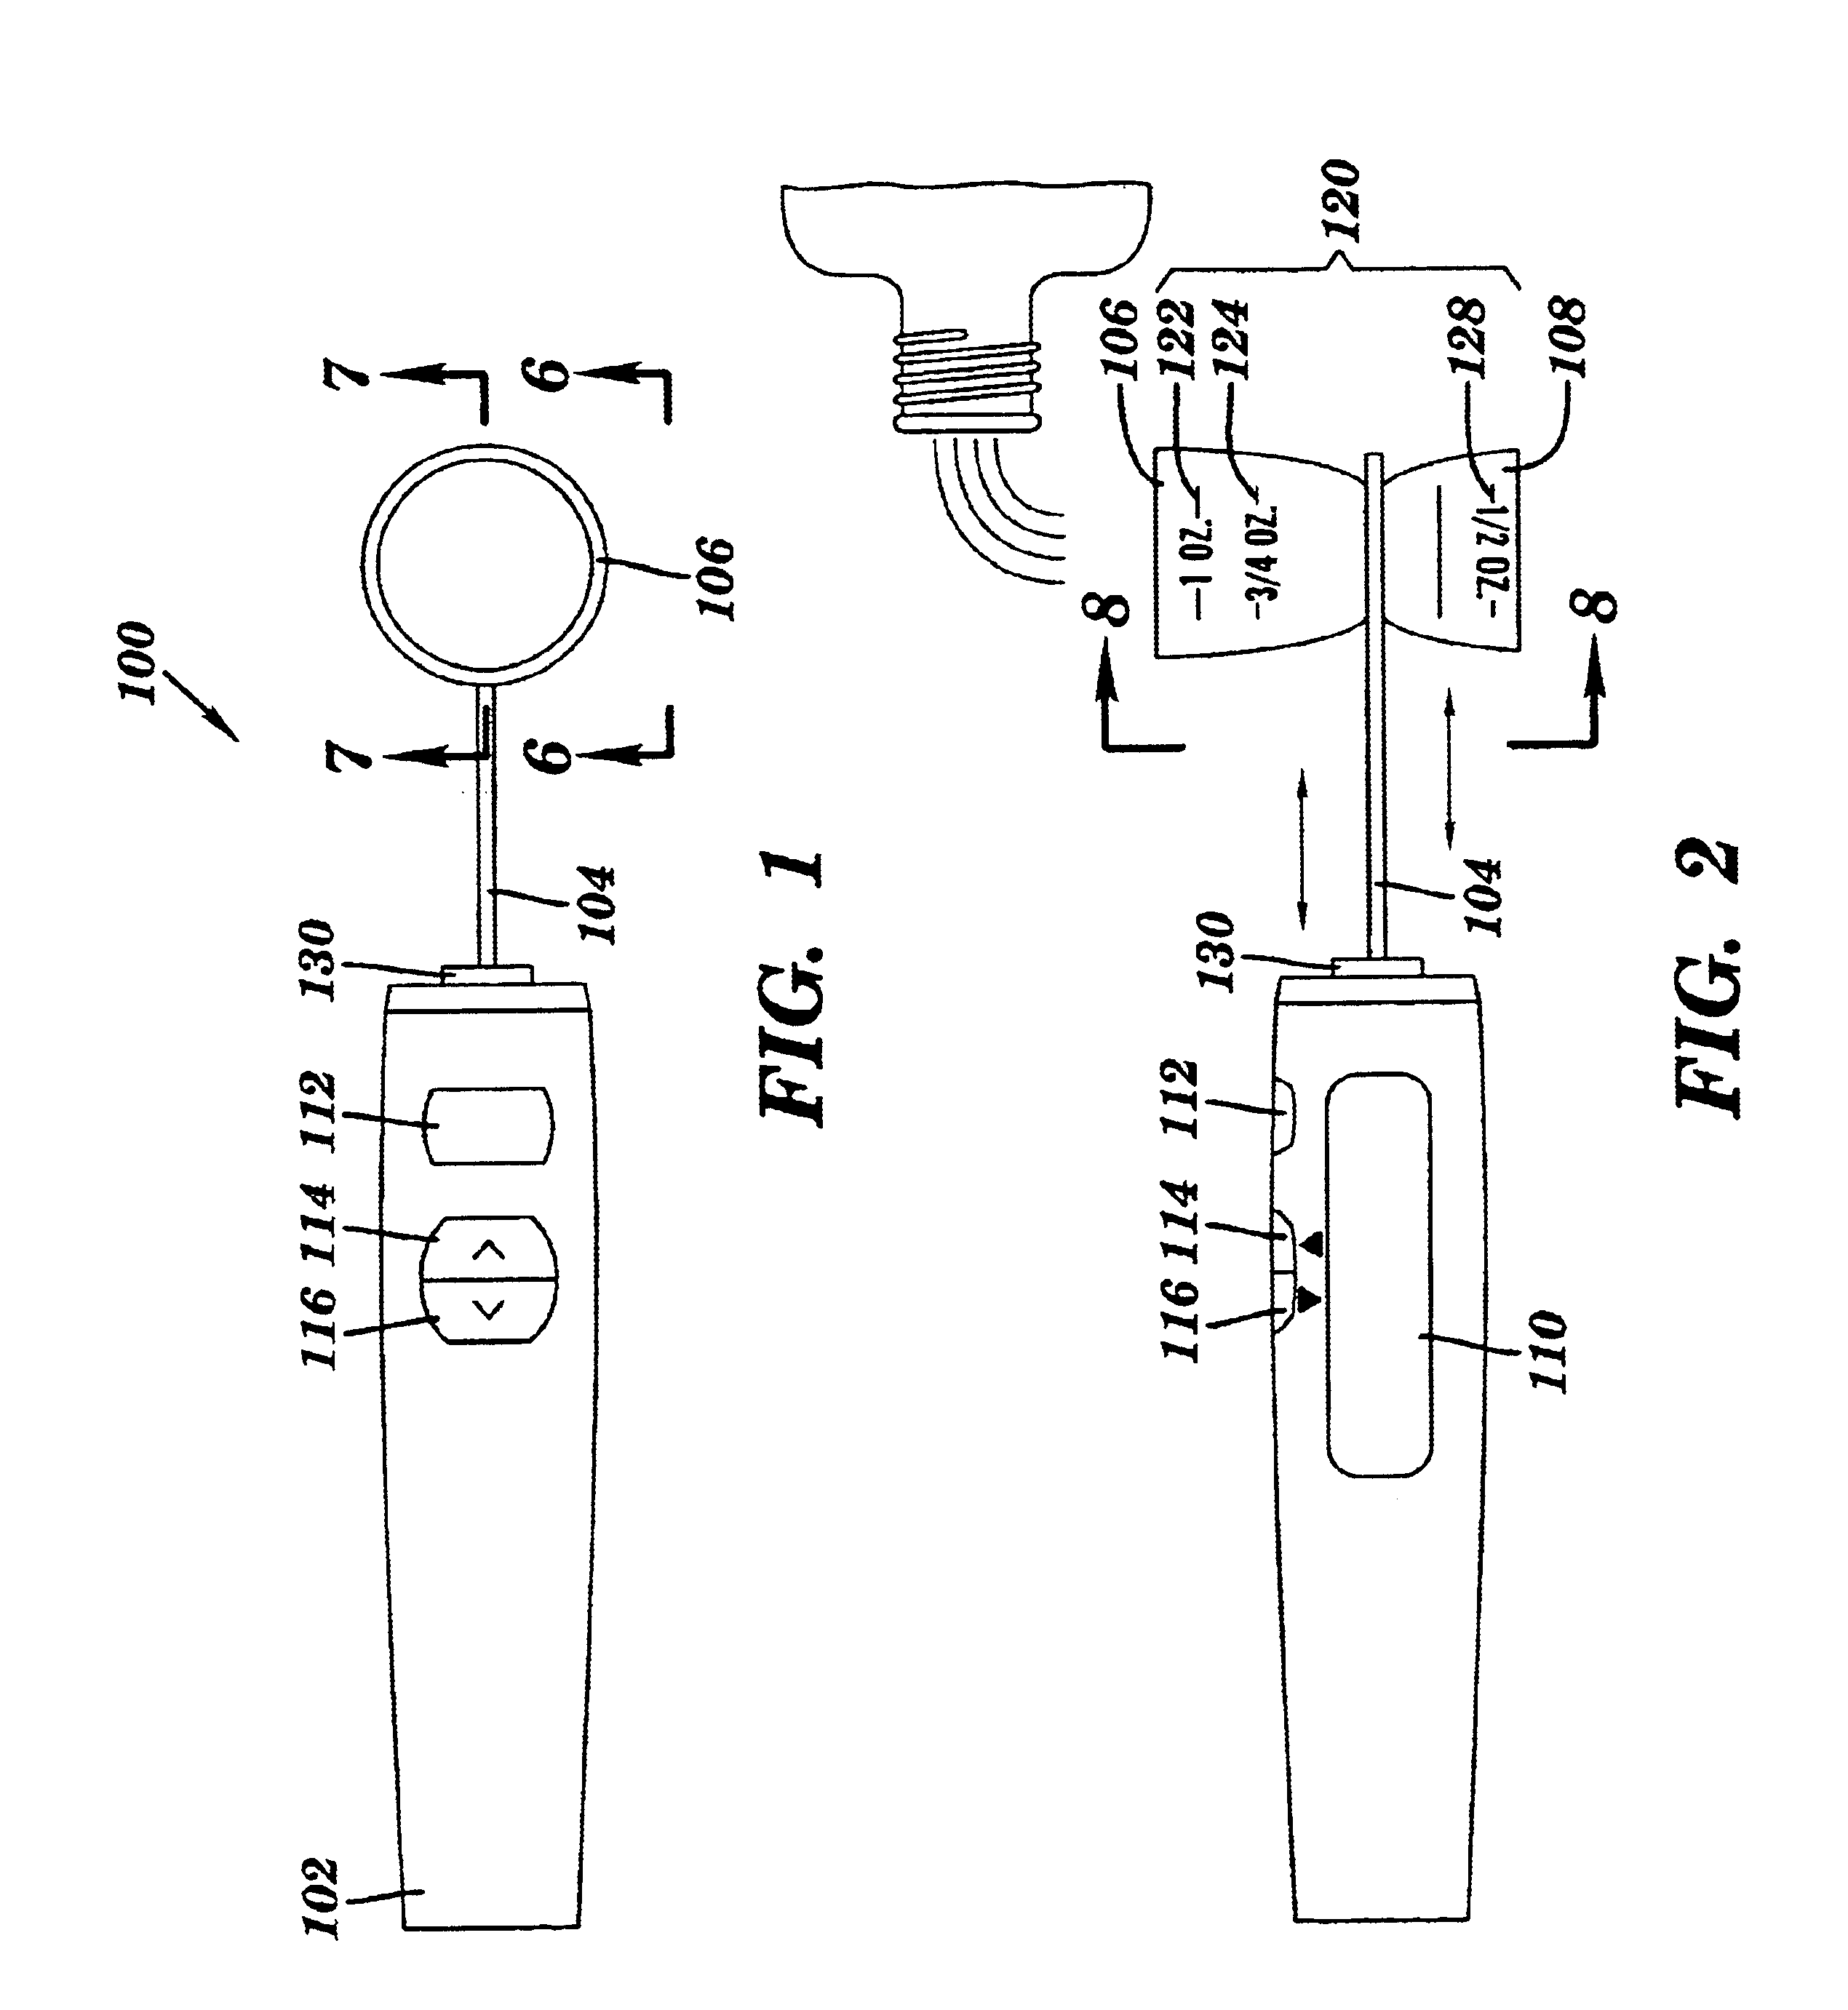 Electronic device for the preparation of mixed drinks